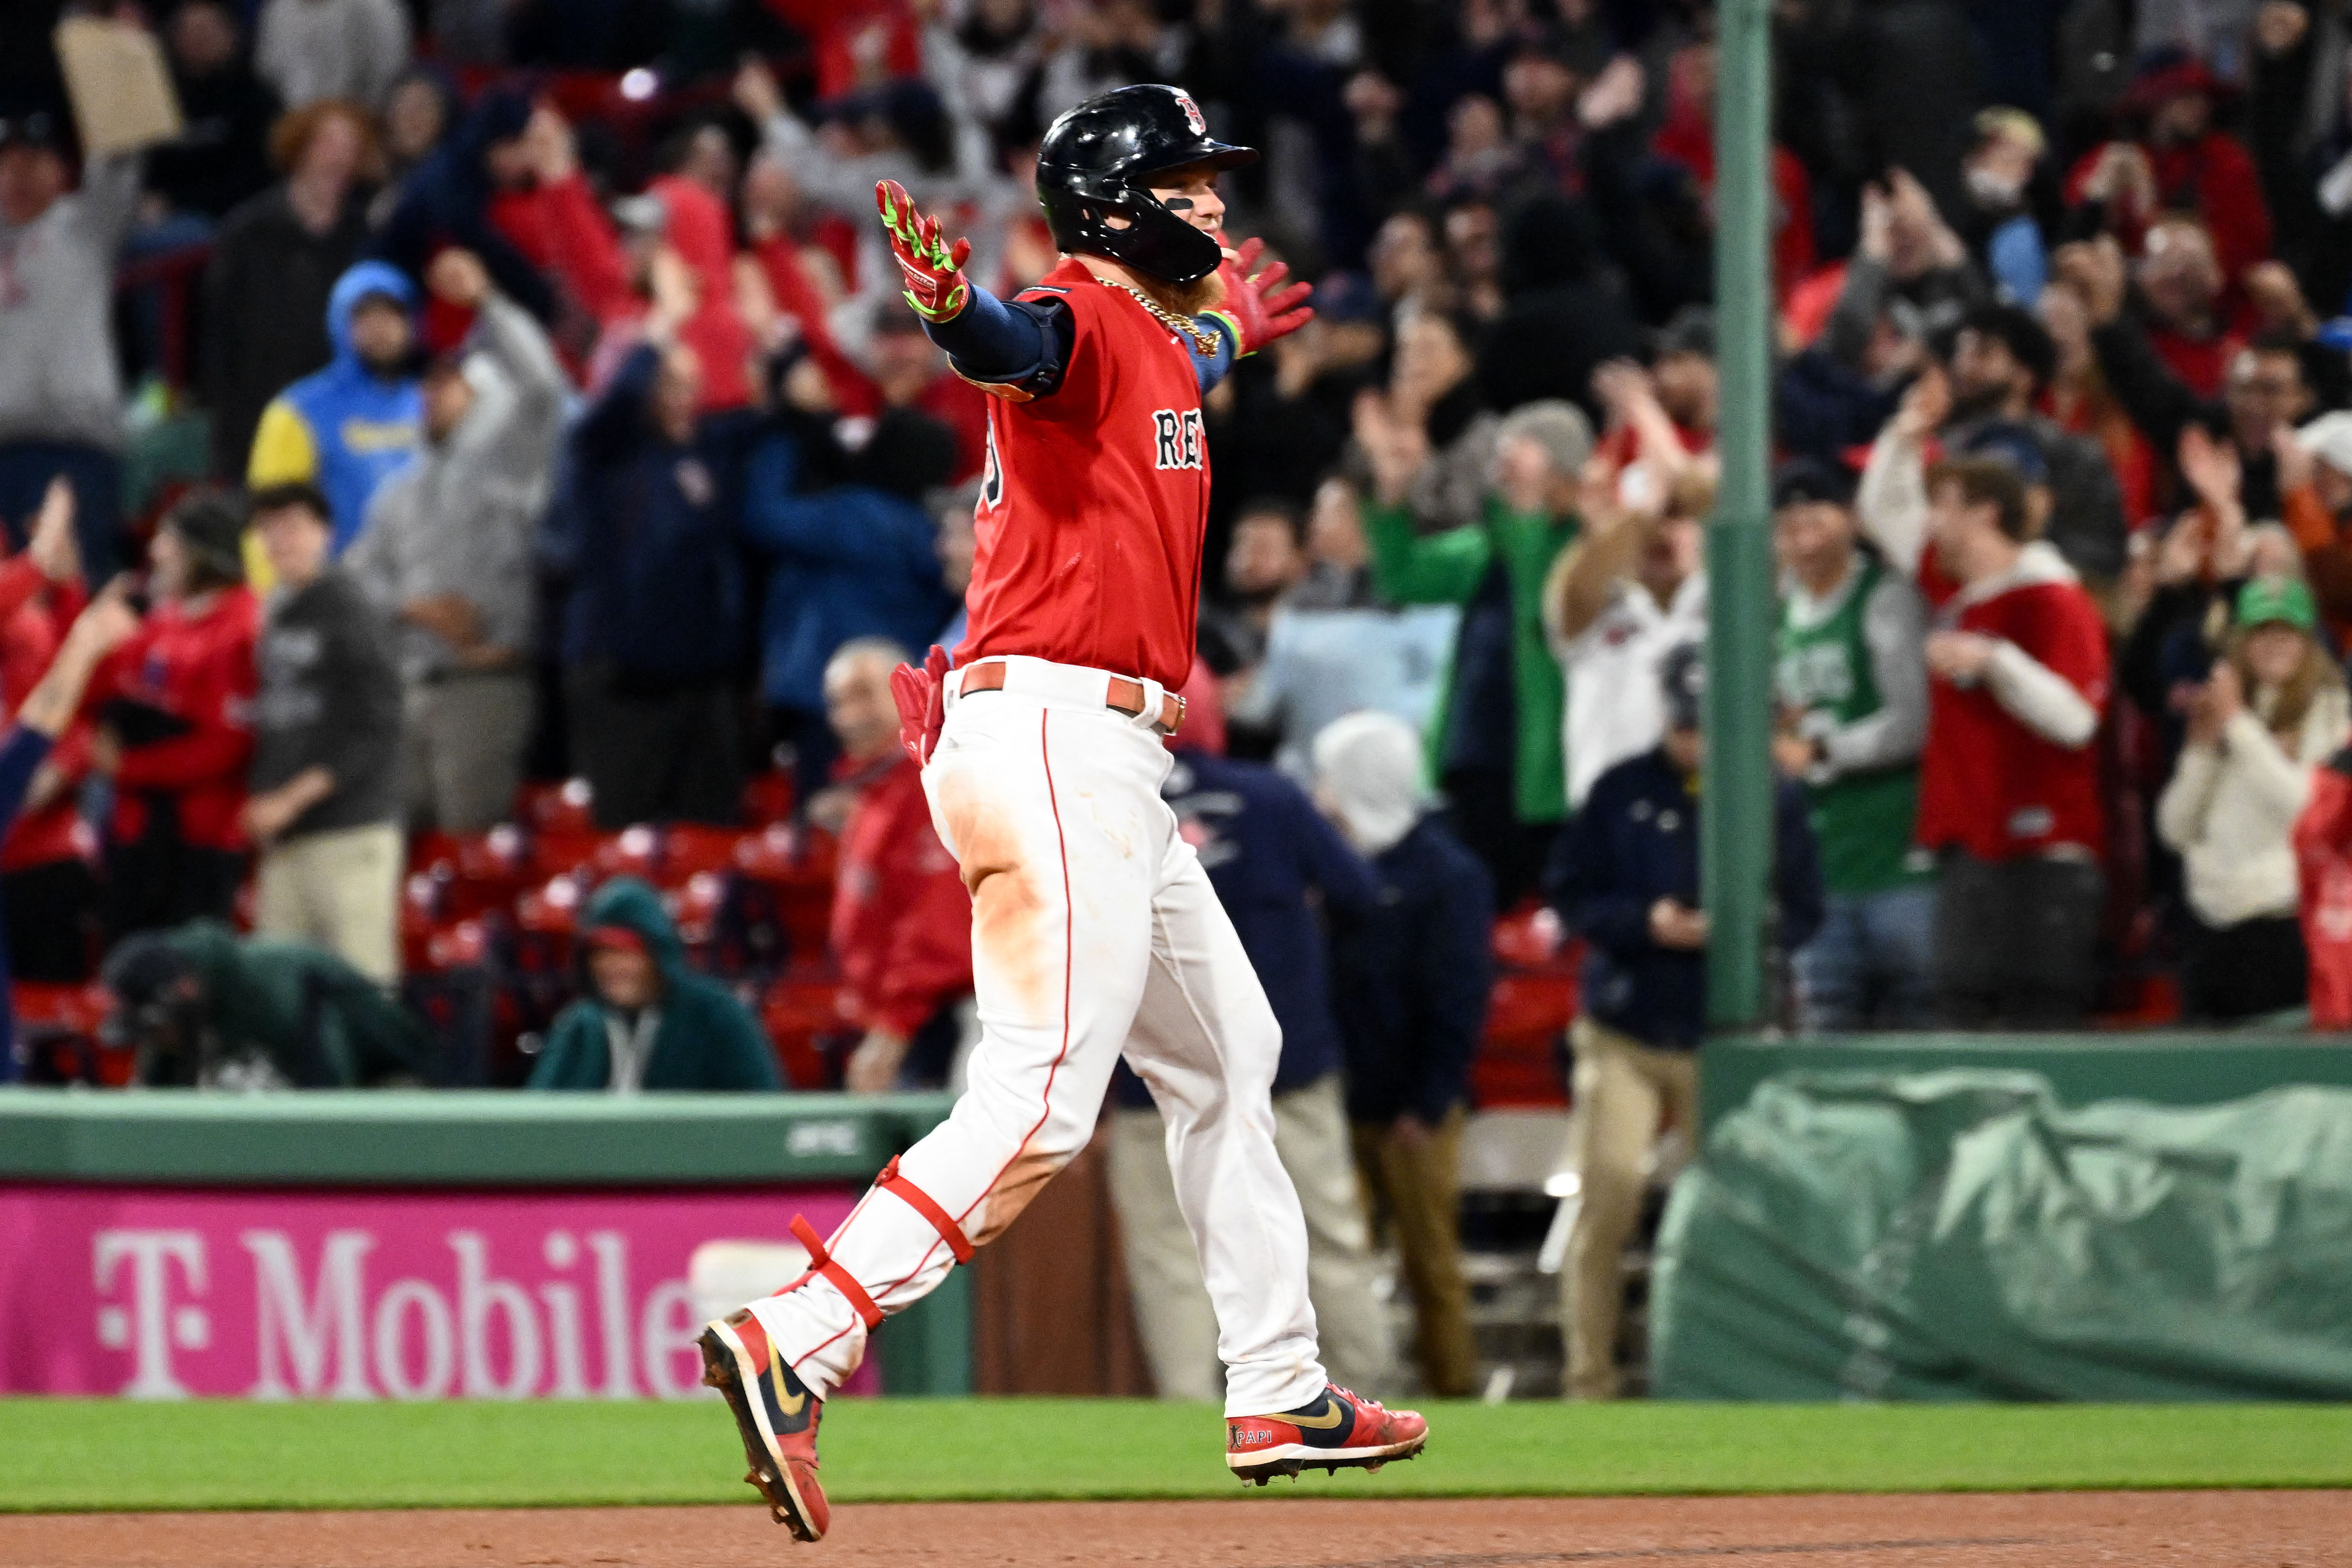 Verdugo homers for 3rd walk-off of season, Red Sox top Blue Jays